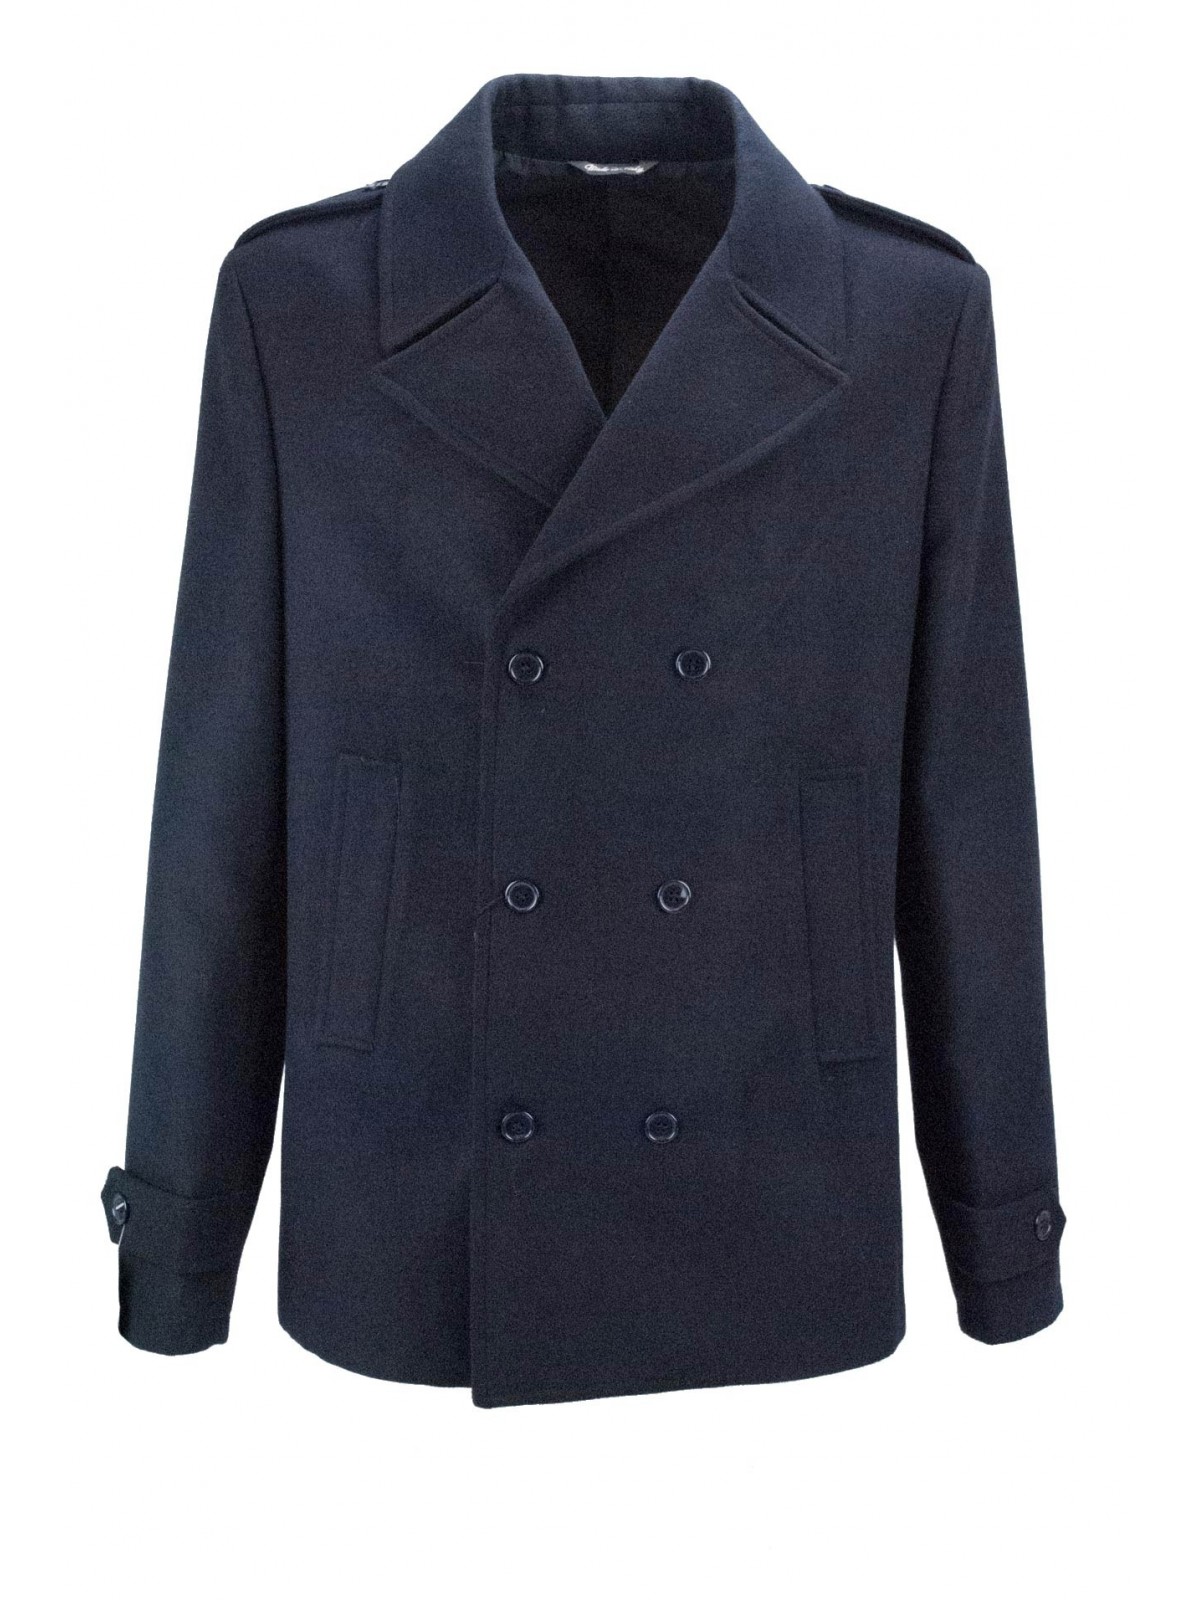 Double-Breasted Jacket Man 54 Dark Blue Wool Cloth - Classic Fit